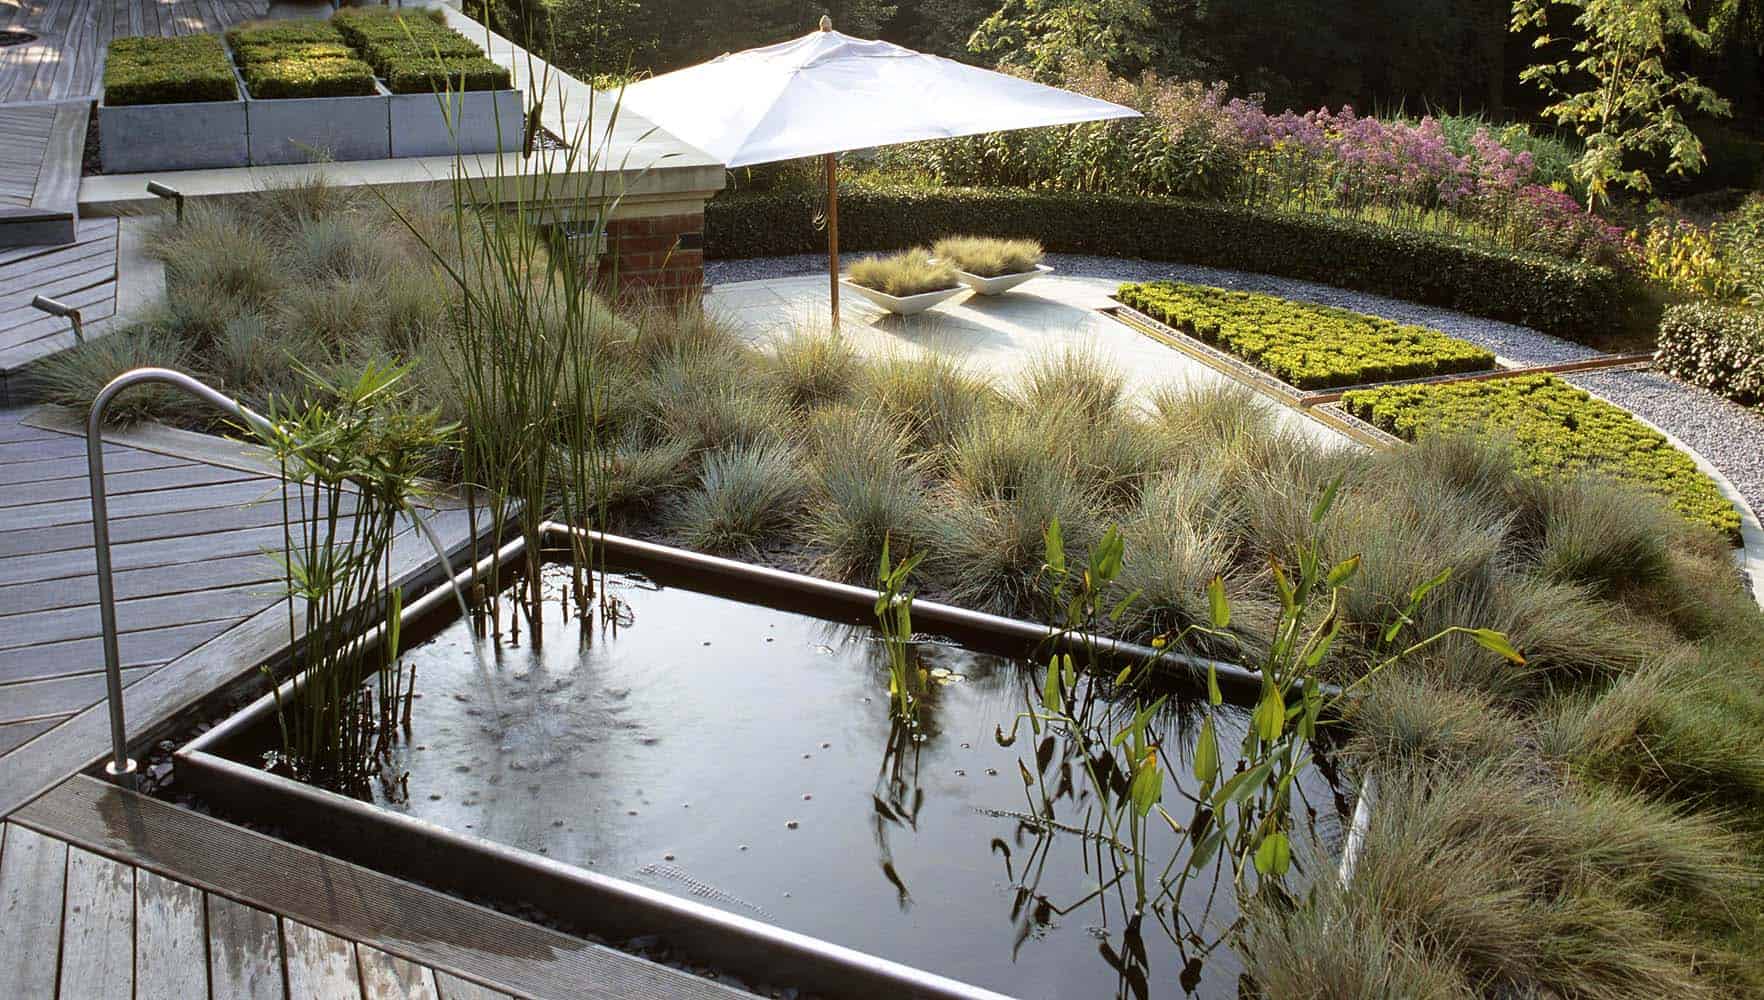 A serene rooftop garden, showcasing garden design basics, features a rectangular reflective pond with aquatic plants, surrounded by tall grasses. Adjacent is a wooden deck leading to a sleek staircase. A white umbrella shades a small seating area next to another landscaped section with lush greenery.